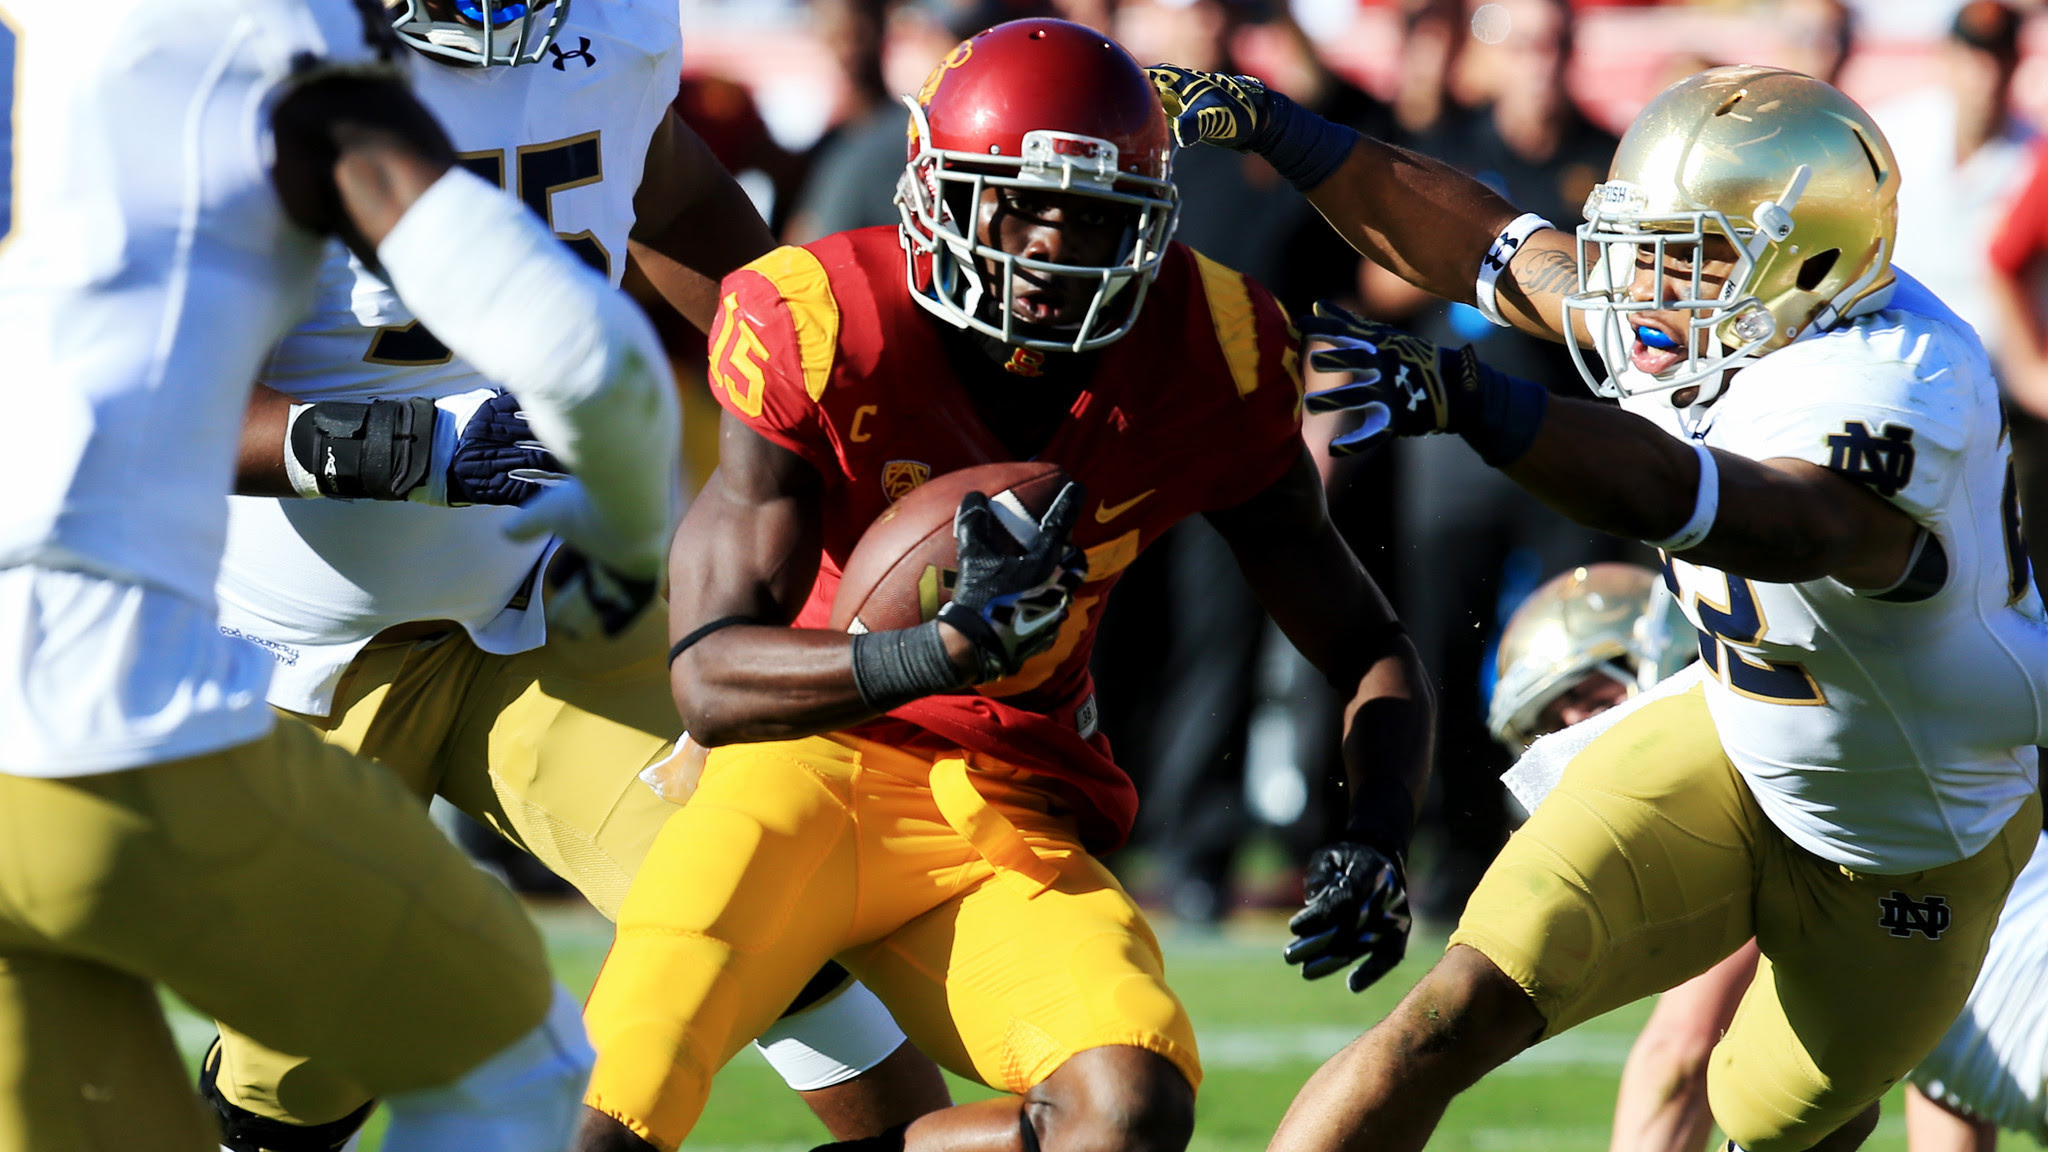 Cody Kessler and USC beat the fight right out of Irish in 49-14 romp